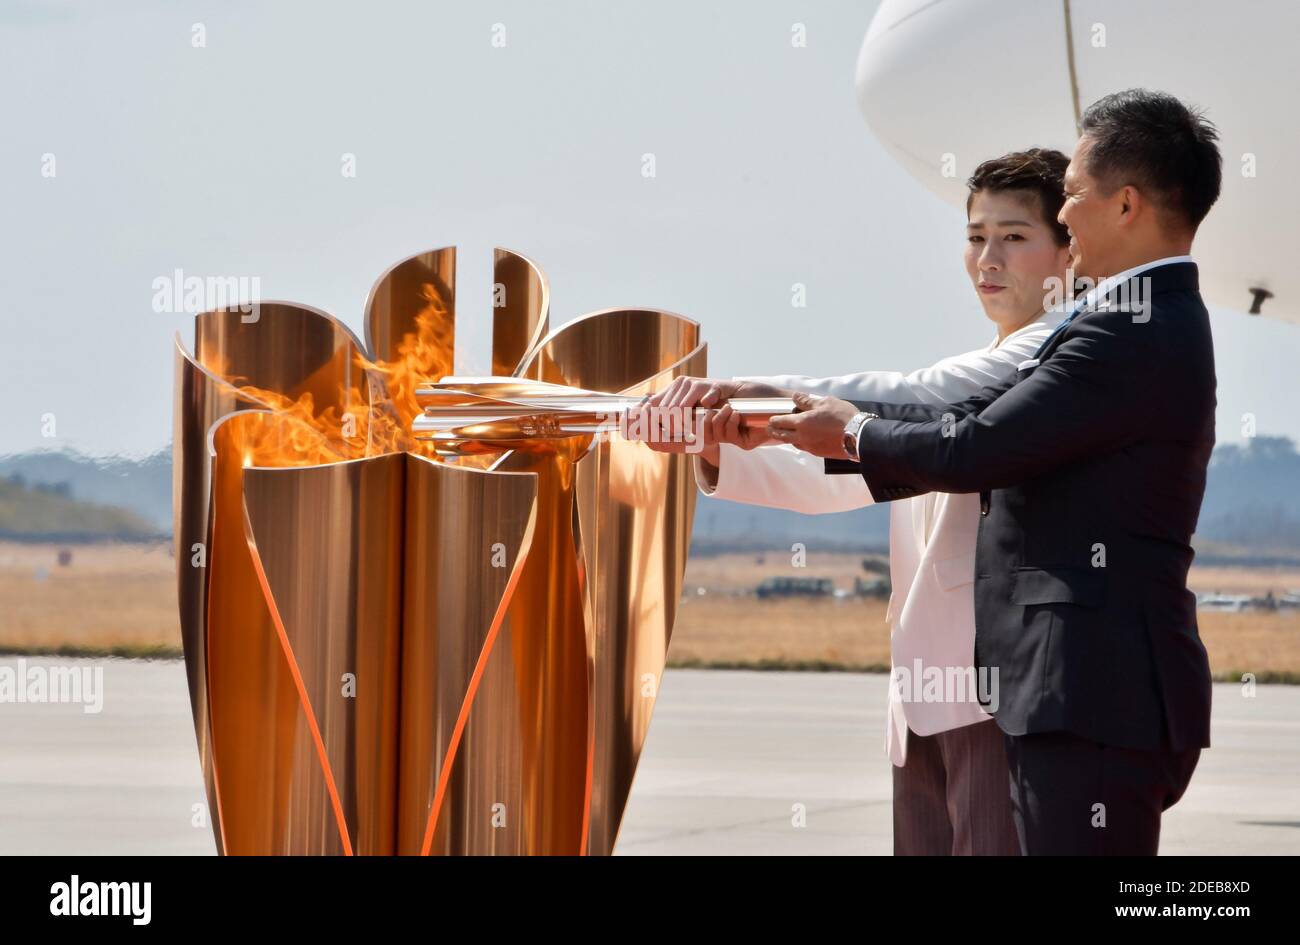 Higashimatsushima, Japan. 29th Nov, 2020. Three-time Olympic gold medalists Tadahiro Nomura(R) and Saori Yoshida light the torch during the Olympic Flame Arrival Ceremony at Japan Air Self-Defense Force (JASDF) Matsushima Base in Higashi-Matsushima, Miyagi prefecture, Japan on Friday, March 20, 2020. Photo by Keizo Mori/UPI Credit: UPI/Alamy Live News Stock Photo